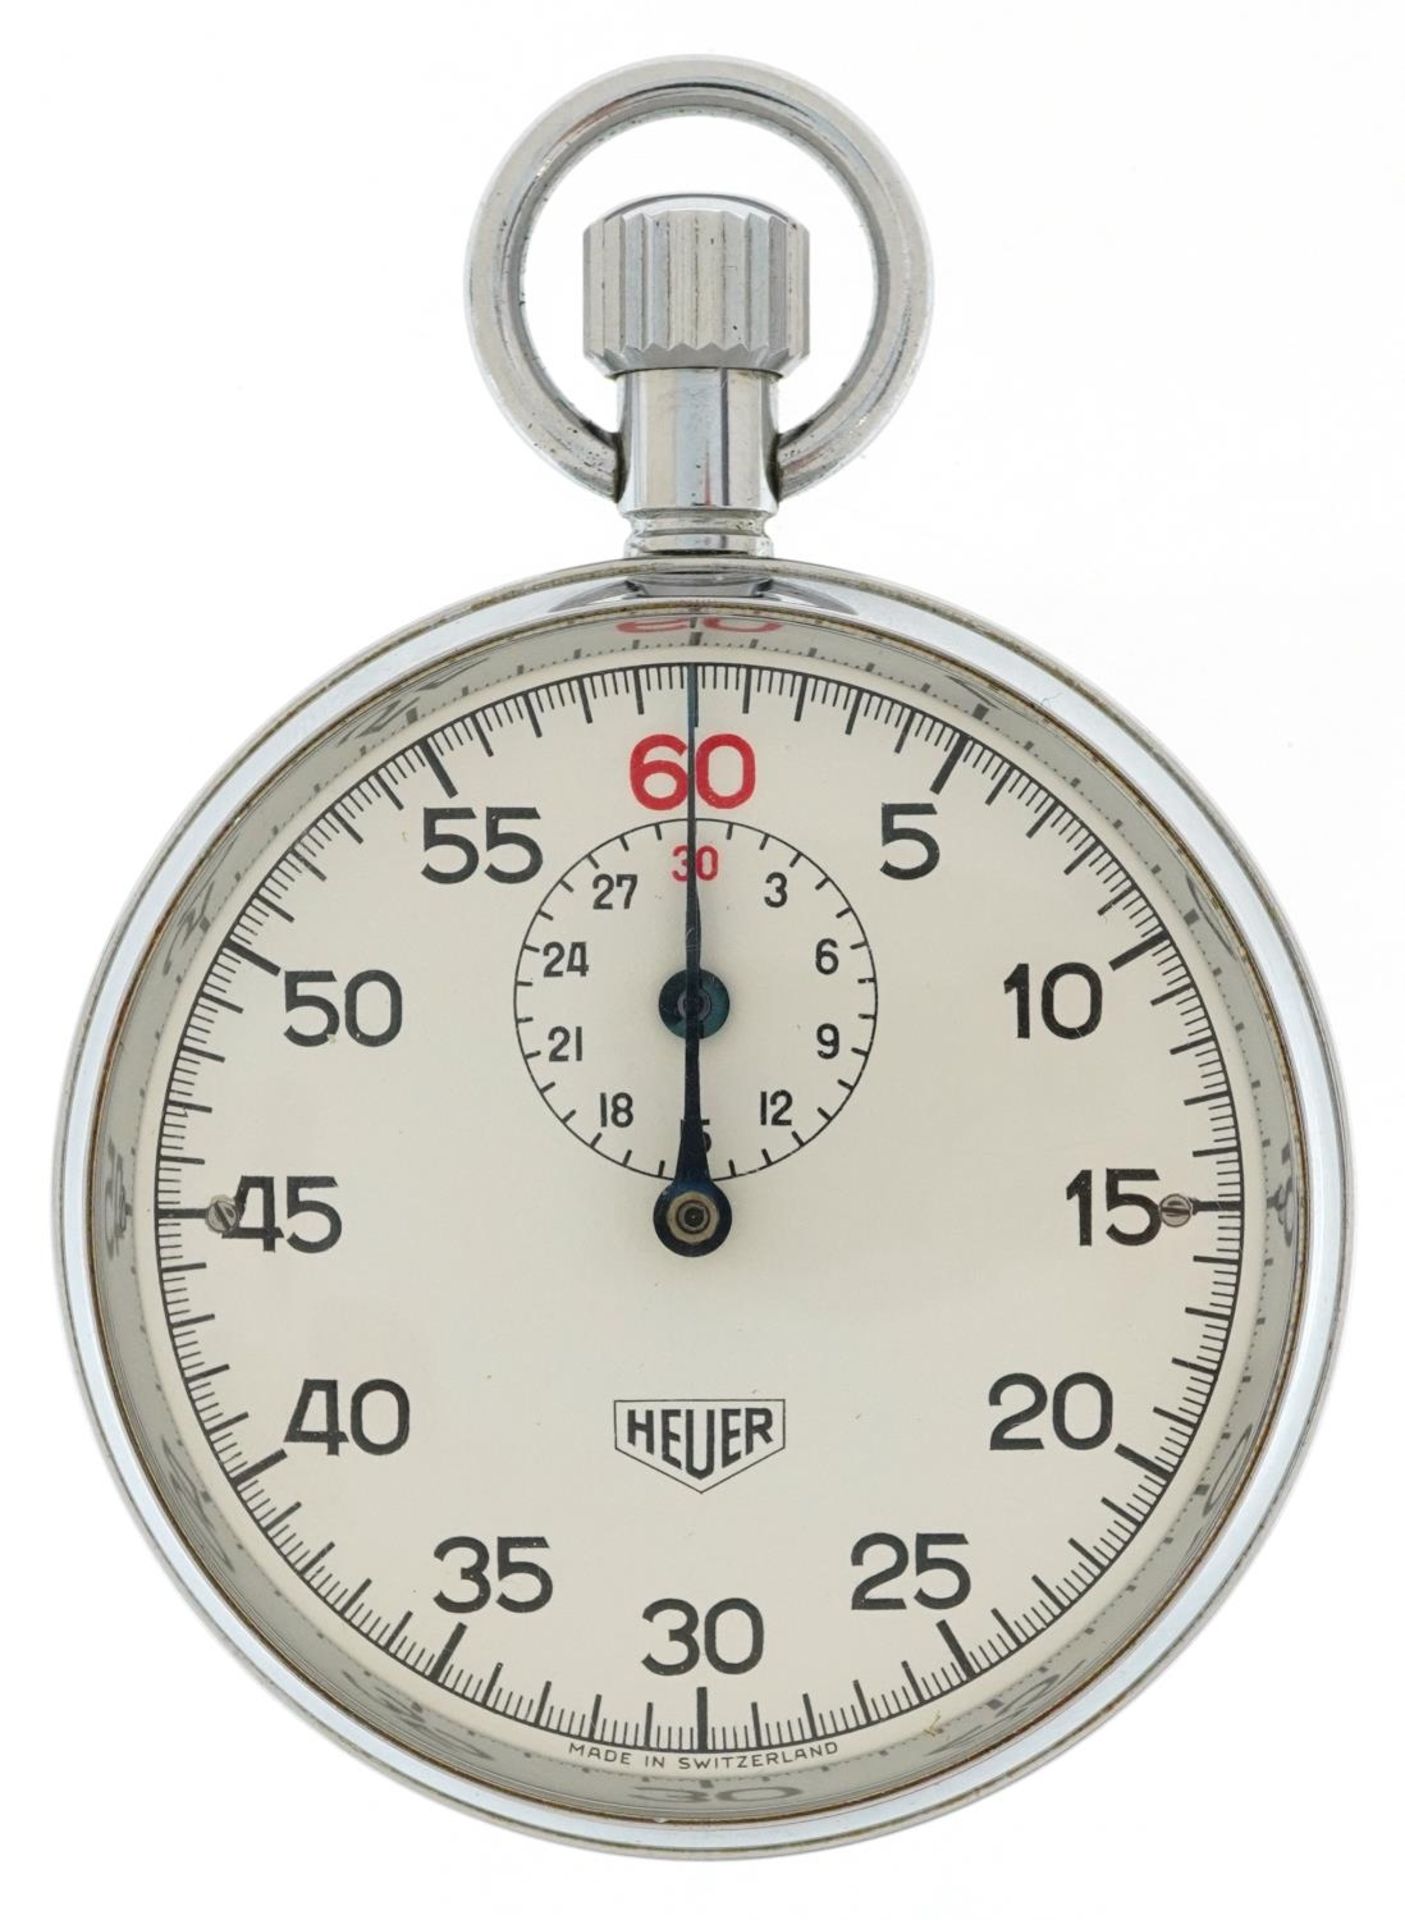 Heuer, vintage chrome plated stopwatch with subsidiary dial, 50mm in diameter